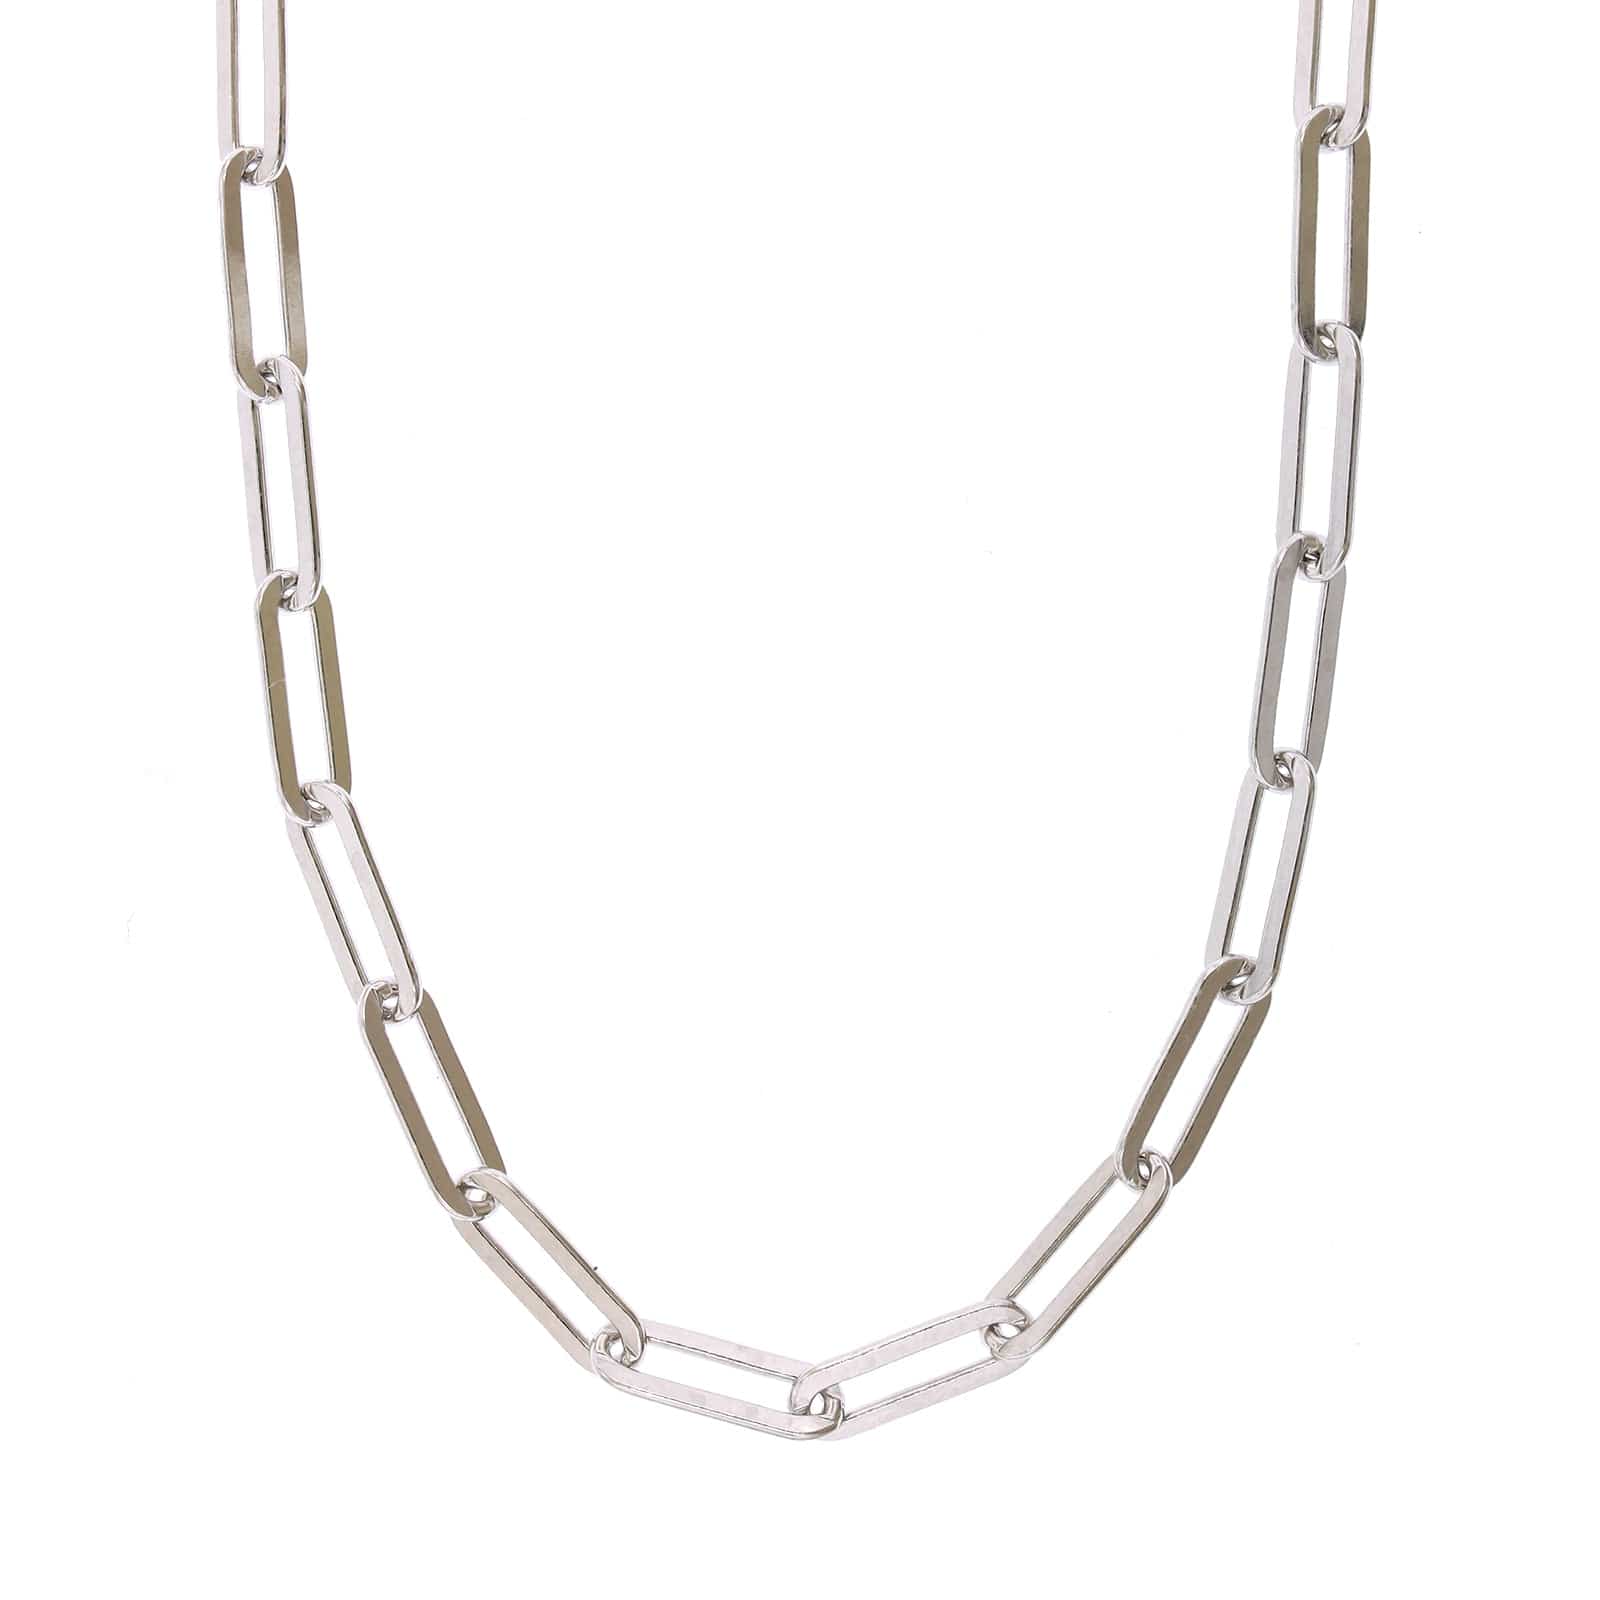 Sterling Silver Paperclip Necklace